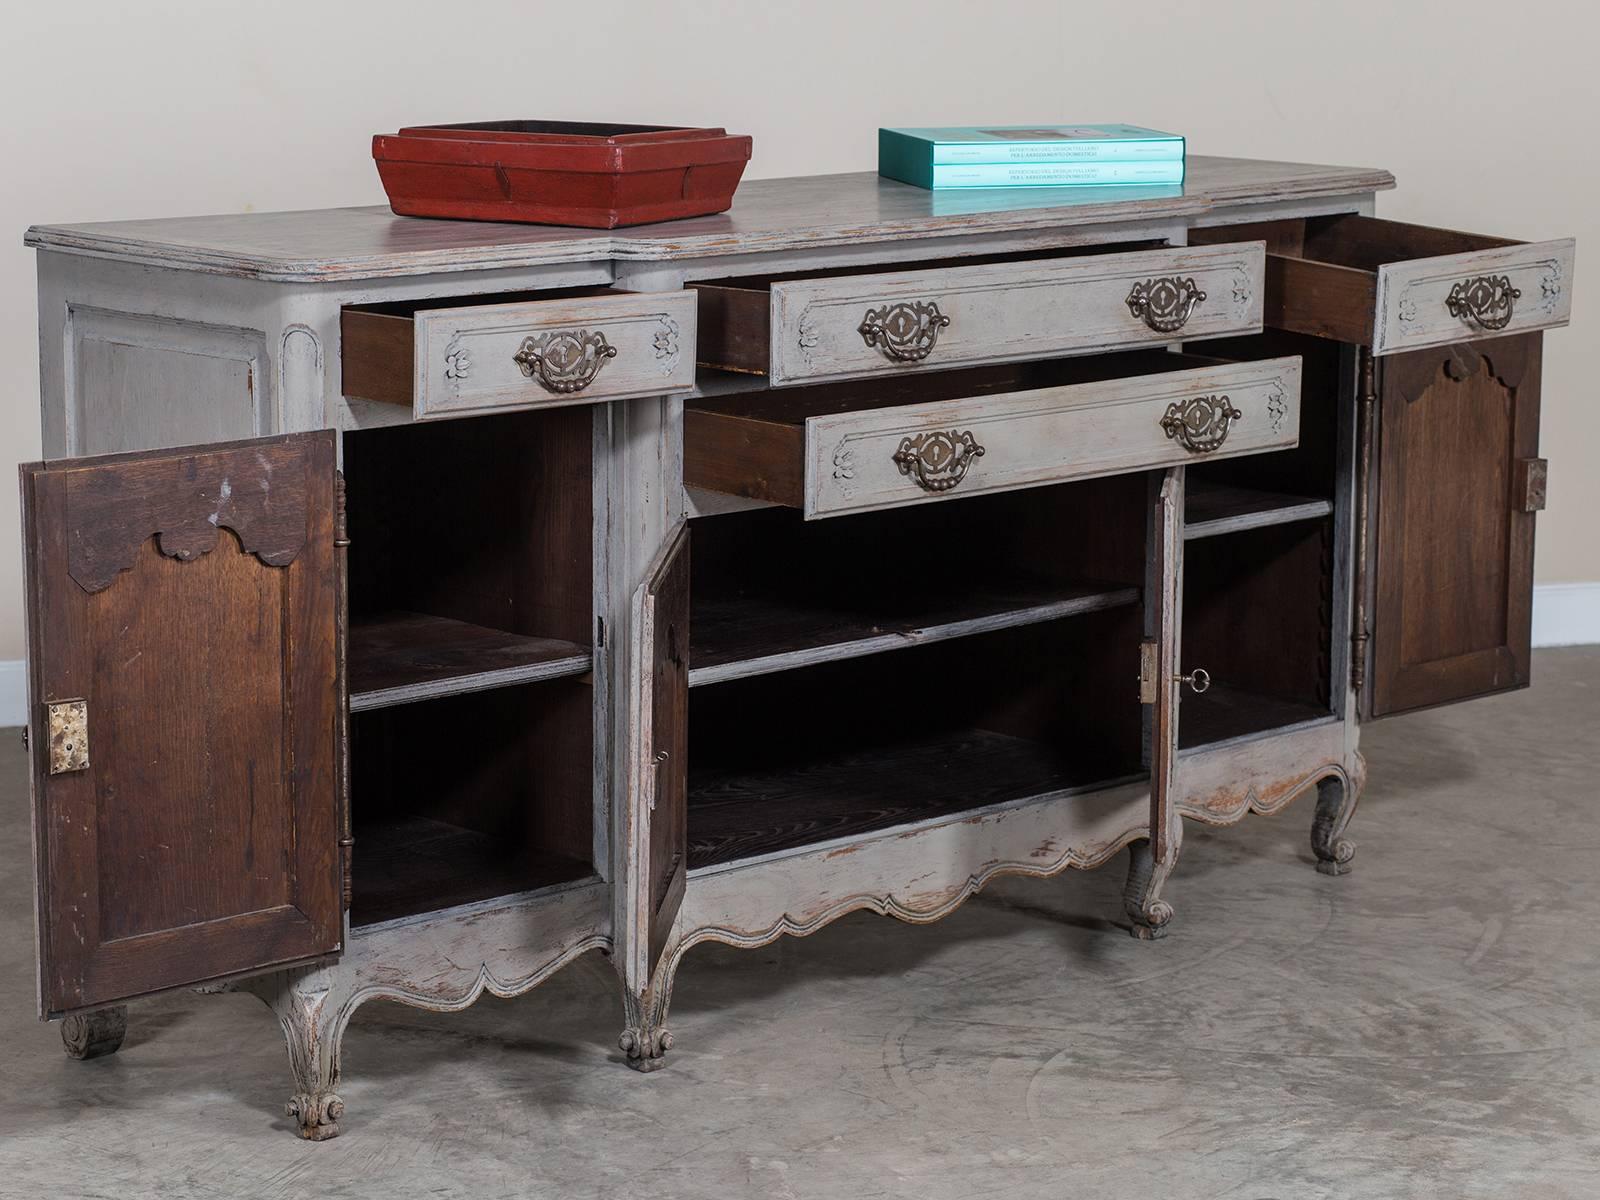 Receive our new selections direct from 1stdibs by email each week. Please click Follow Dealer below and see them first!

The excellent carved details and unusual configuration of cabinets and drawers give this antique French buffet credenza, circa